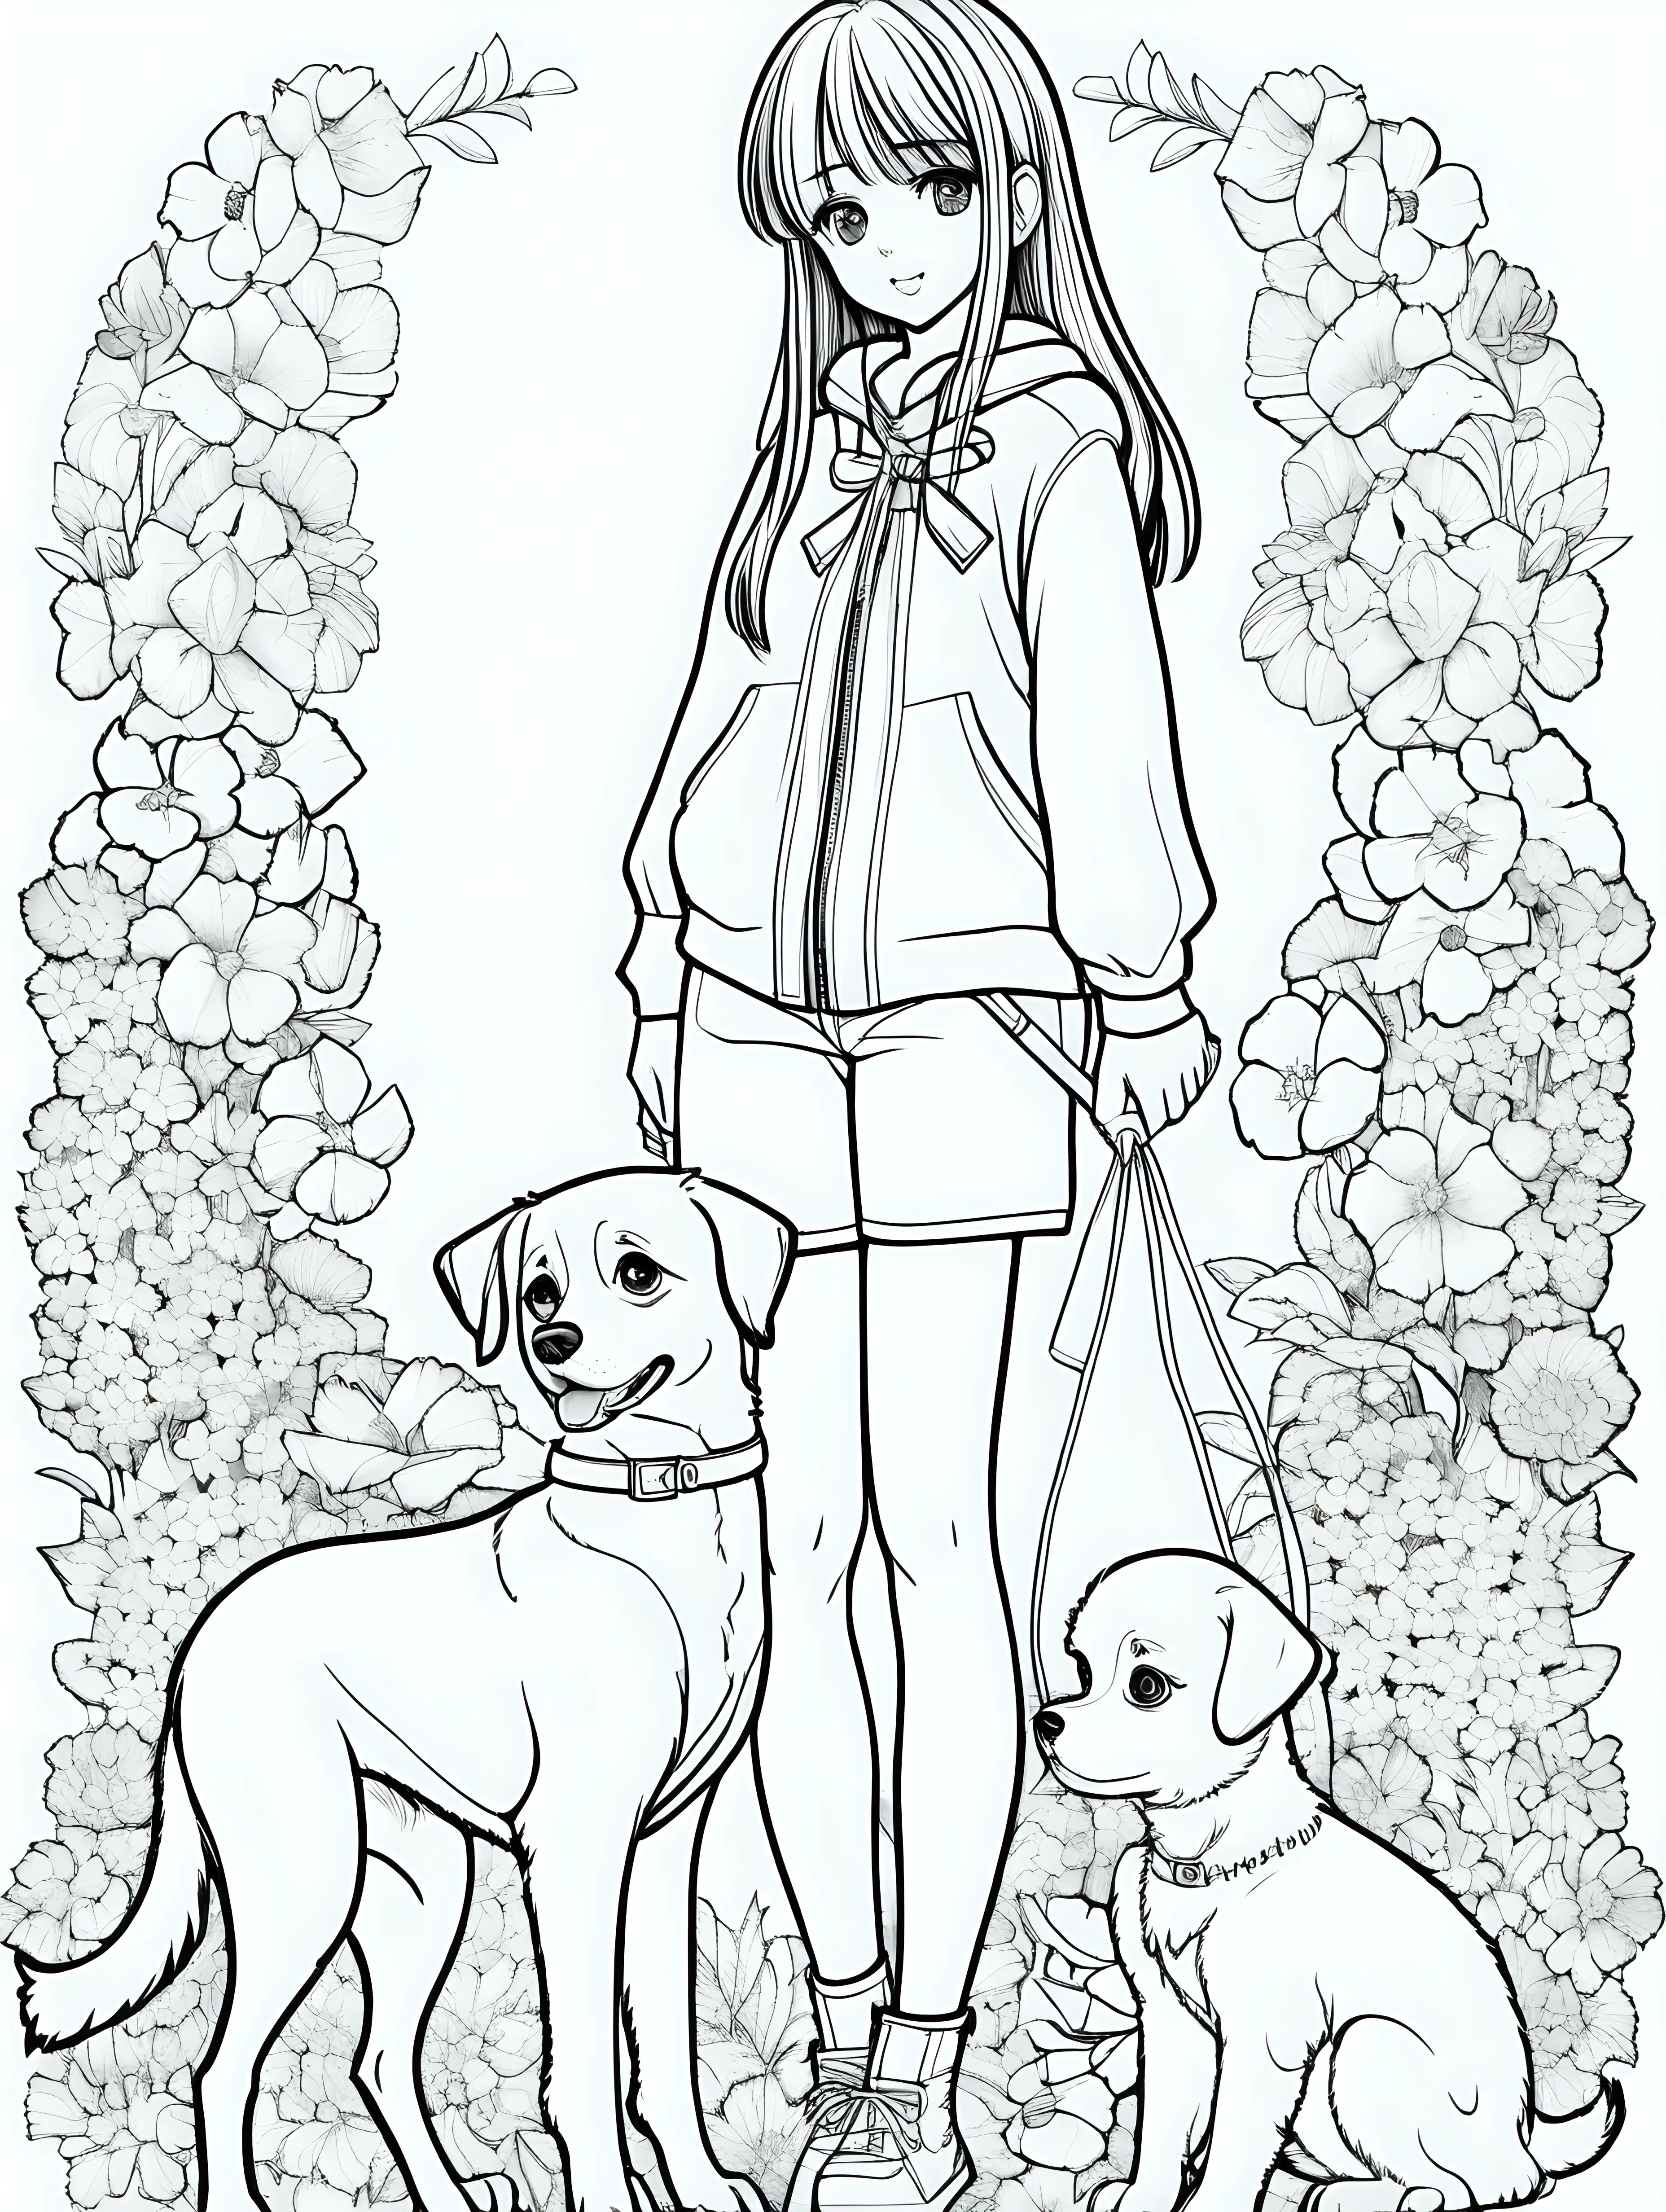 Young Manga Anime Girl Coloring Page with Dog and Flowers